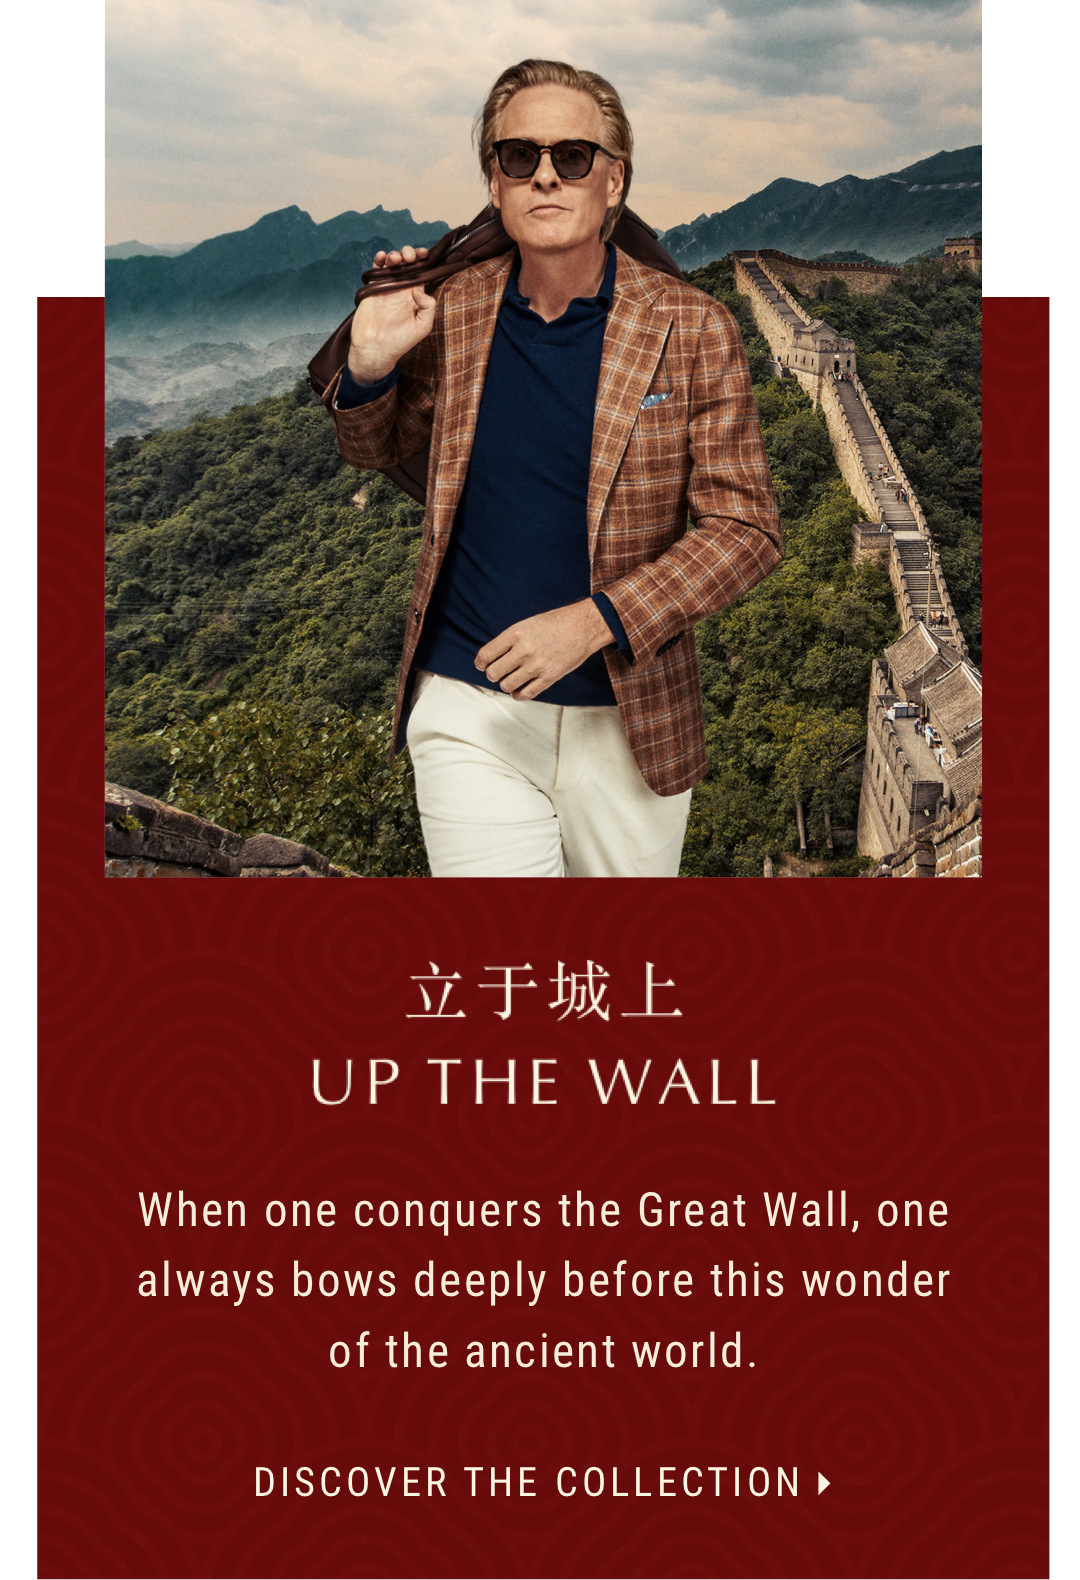 Up The Wall | Discover the Campaign